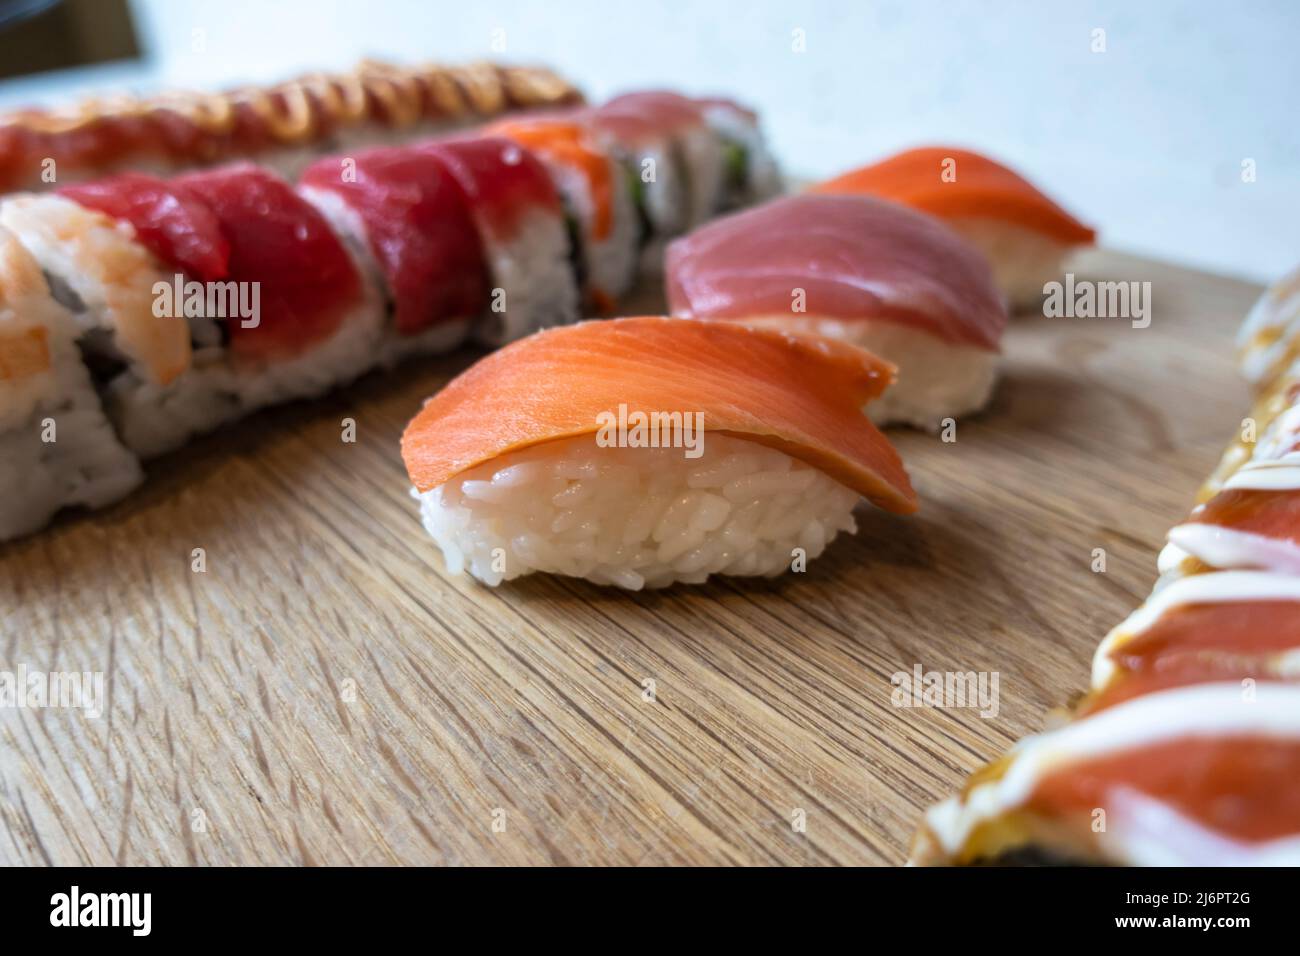 Angled, selective focus view of a variety of sushi rolls on a bamboo cutting board Stock Photo